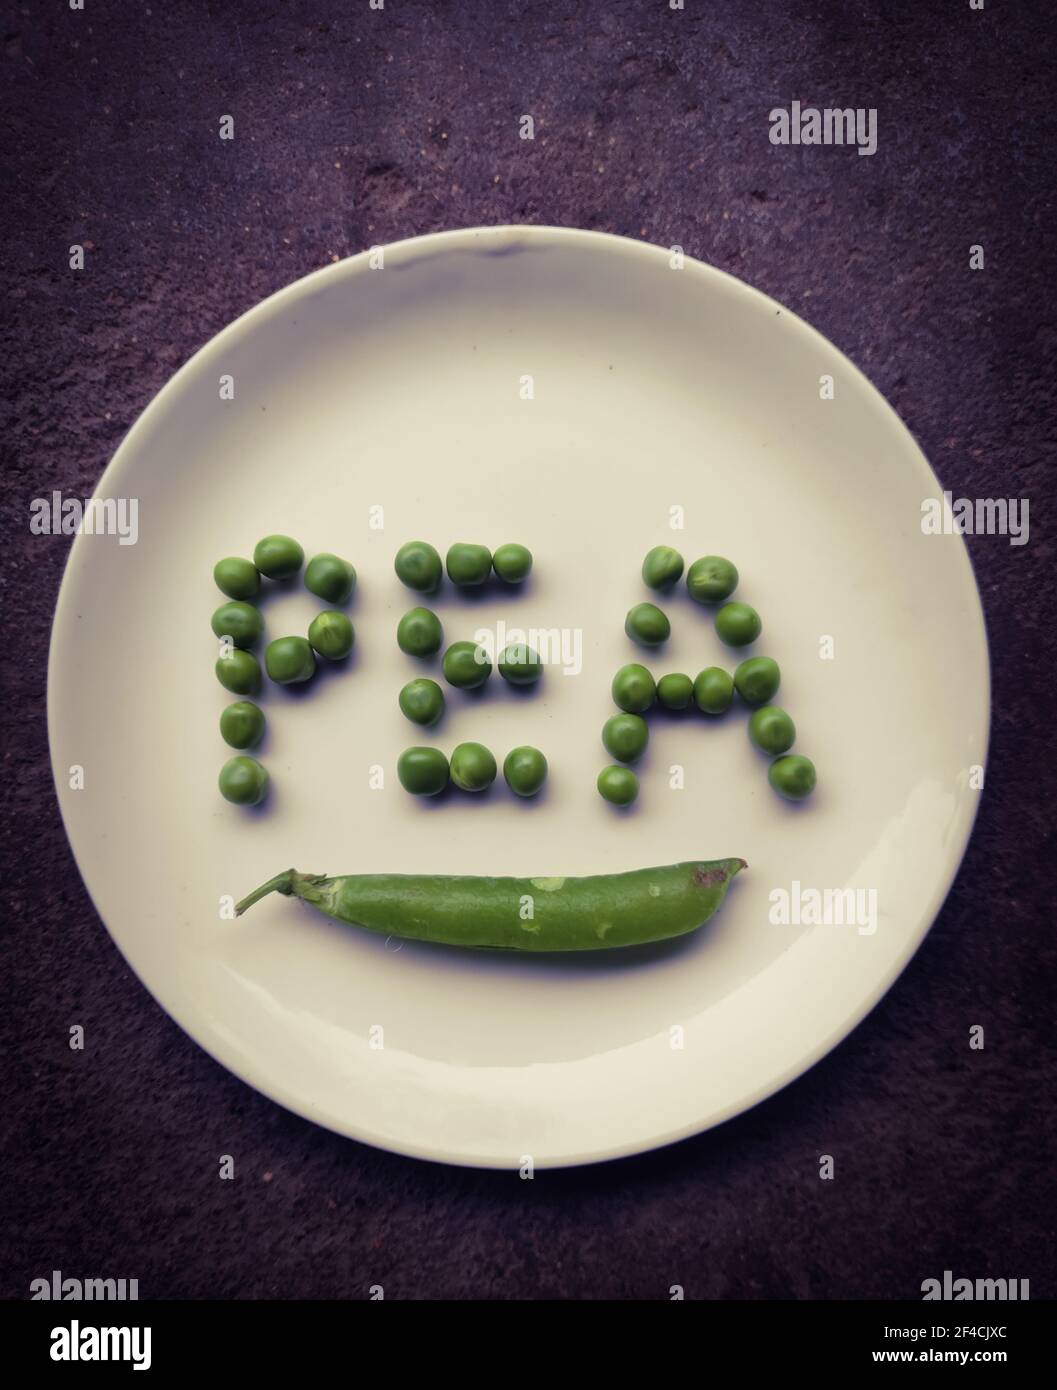 Beautiful image of fresh green peas on a plate with text from seeds this text and words are made from seeds of peas grain Stock Photo